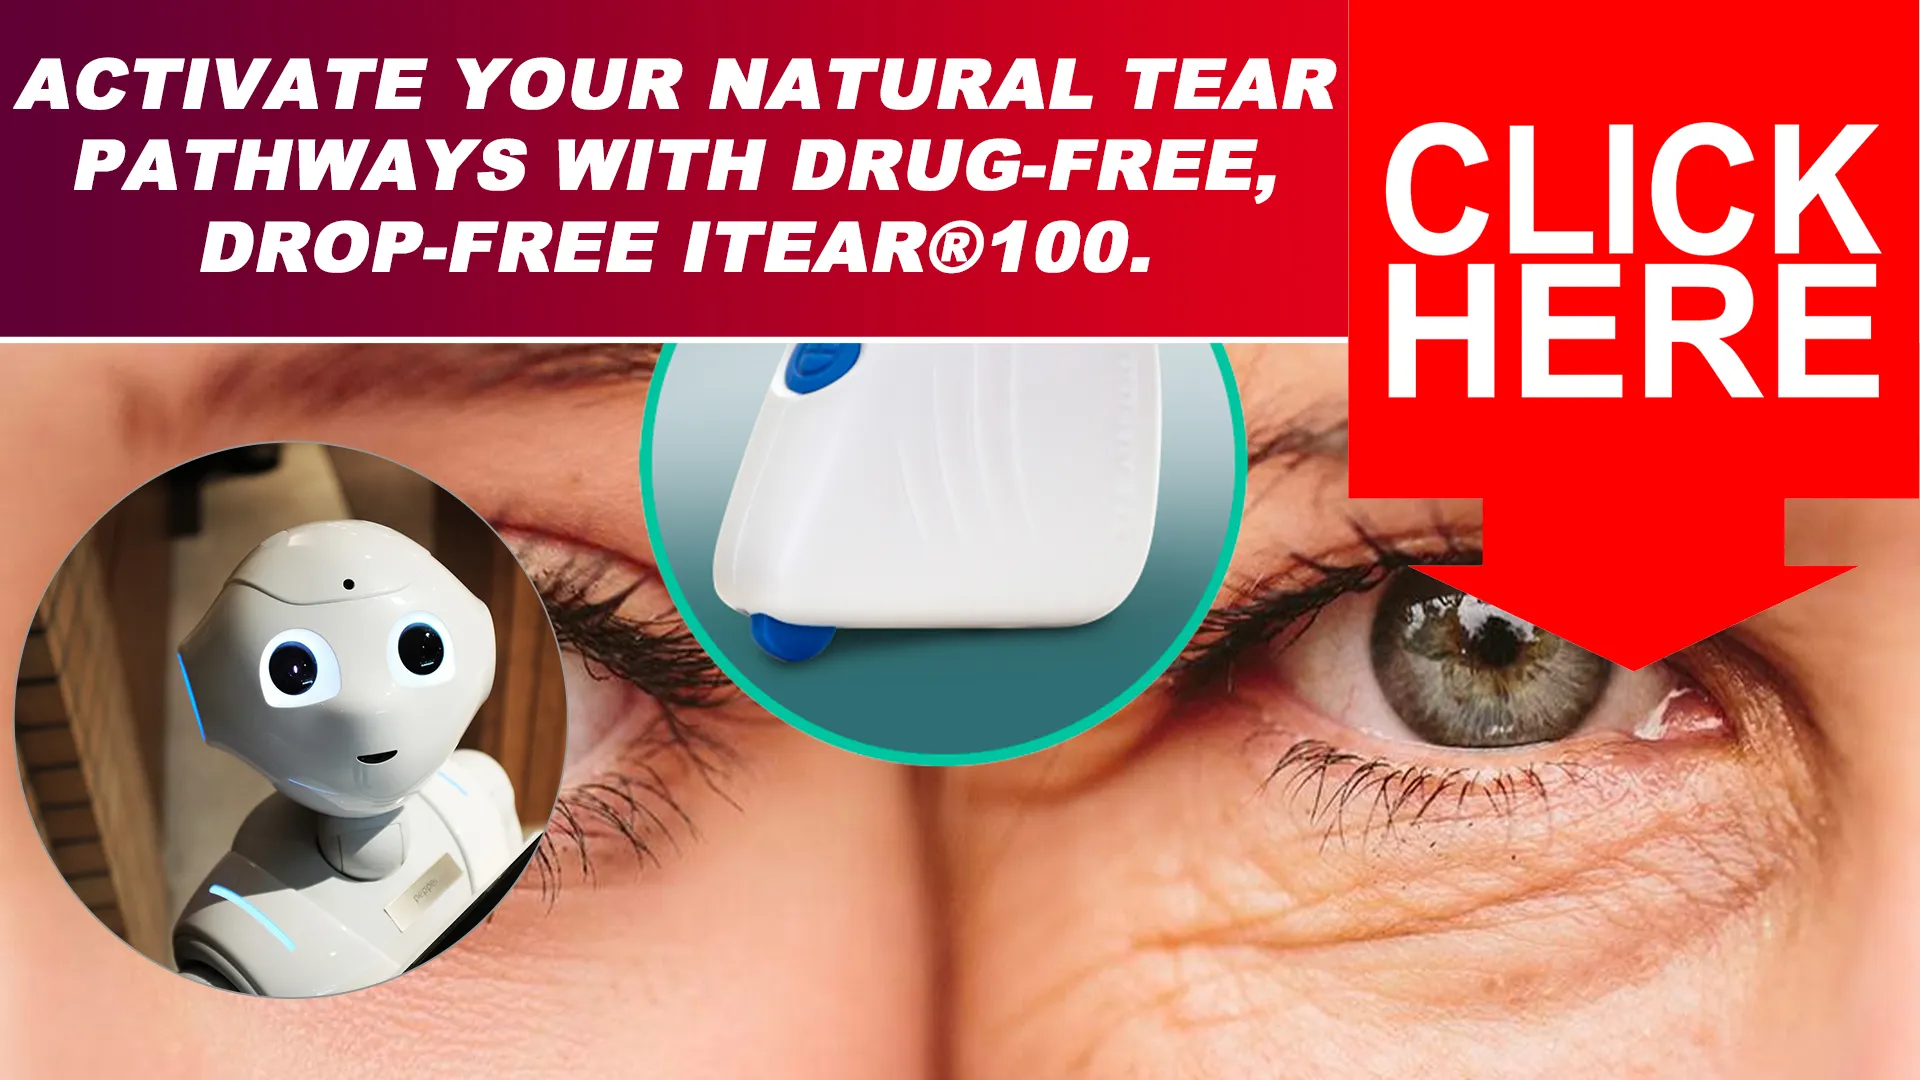 The Seamless Integration of iTear100 Into Your Routine